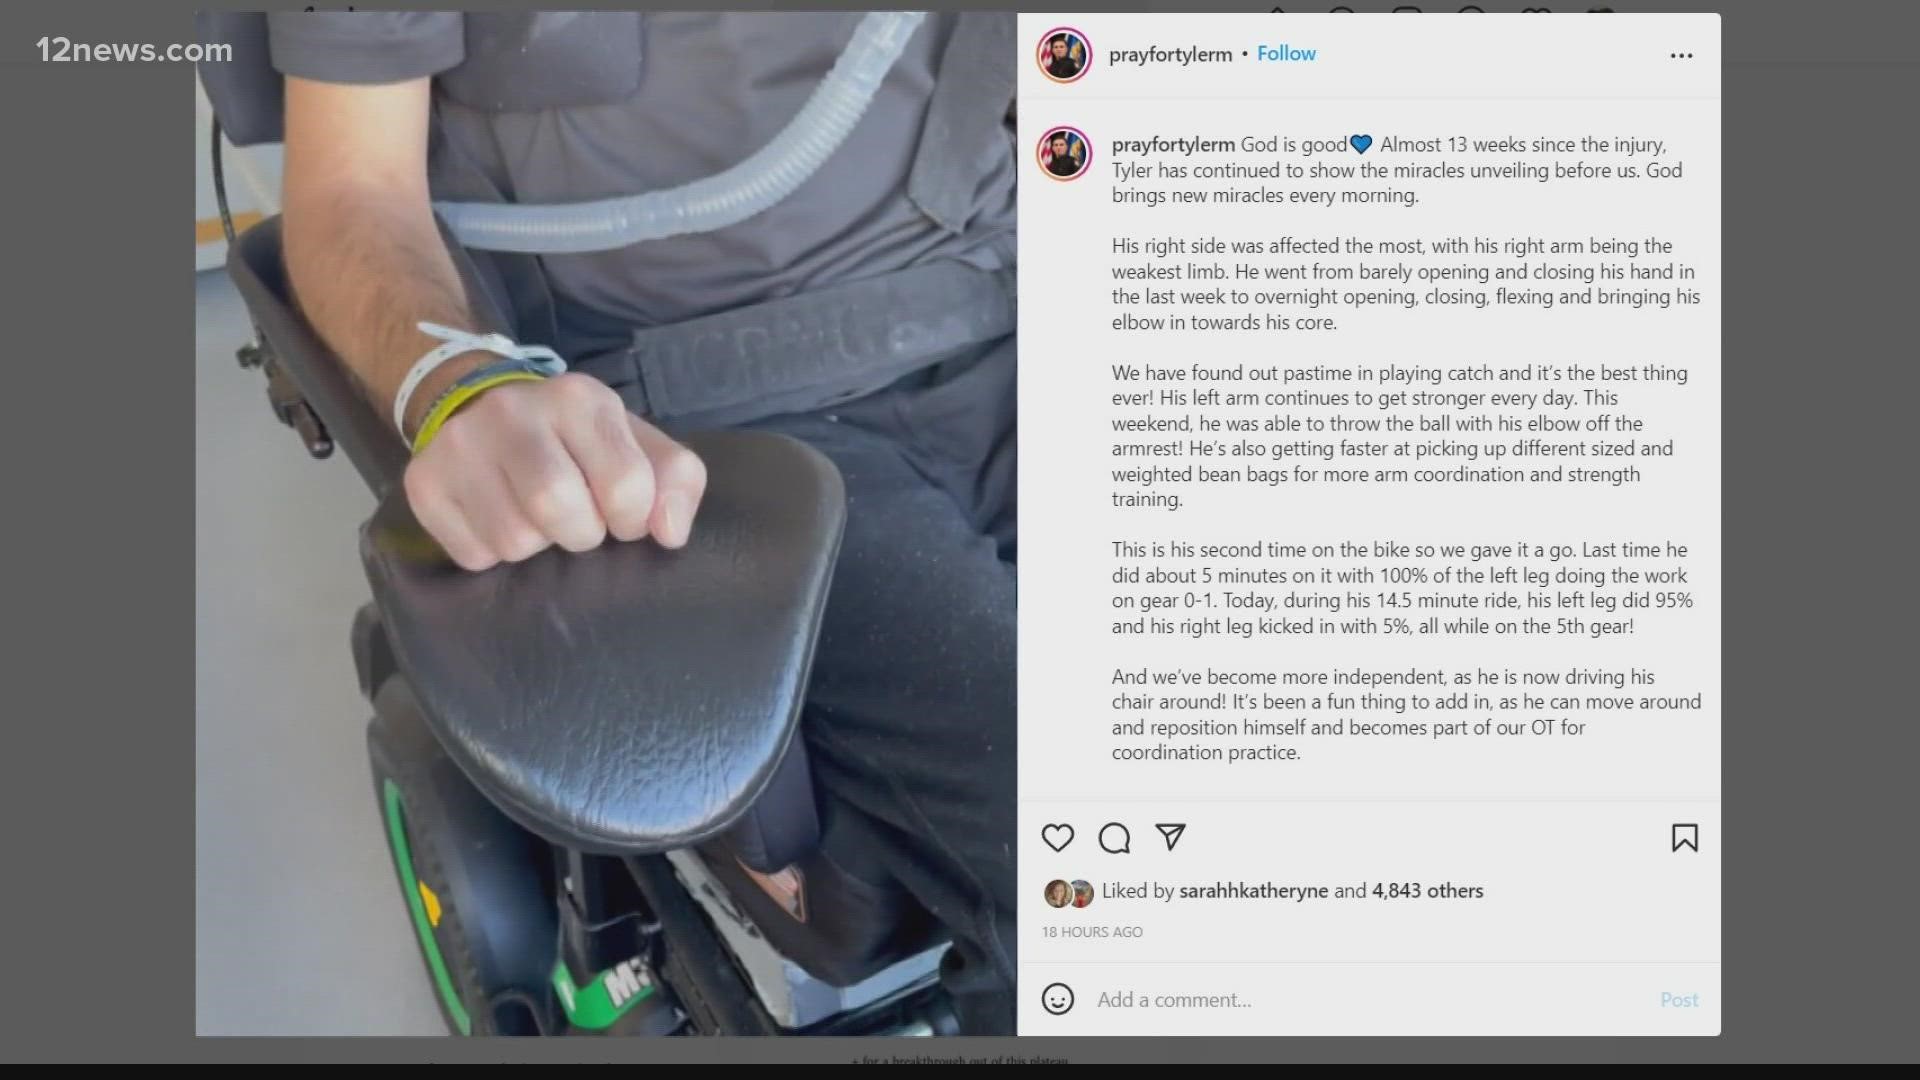 Phoenix Police Officer Tyler Moldovan was shot eight times in December in the line of duty. His wife posted a video of him closing and flexing his right arm.